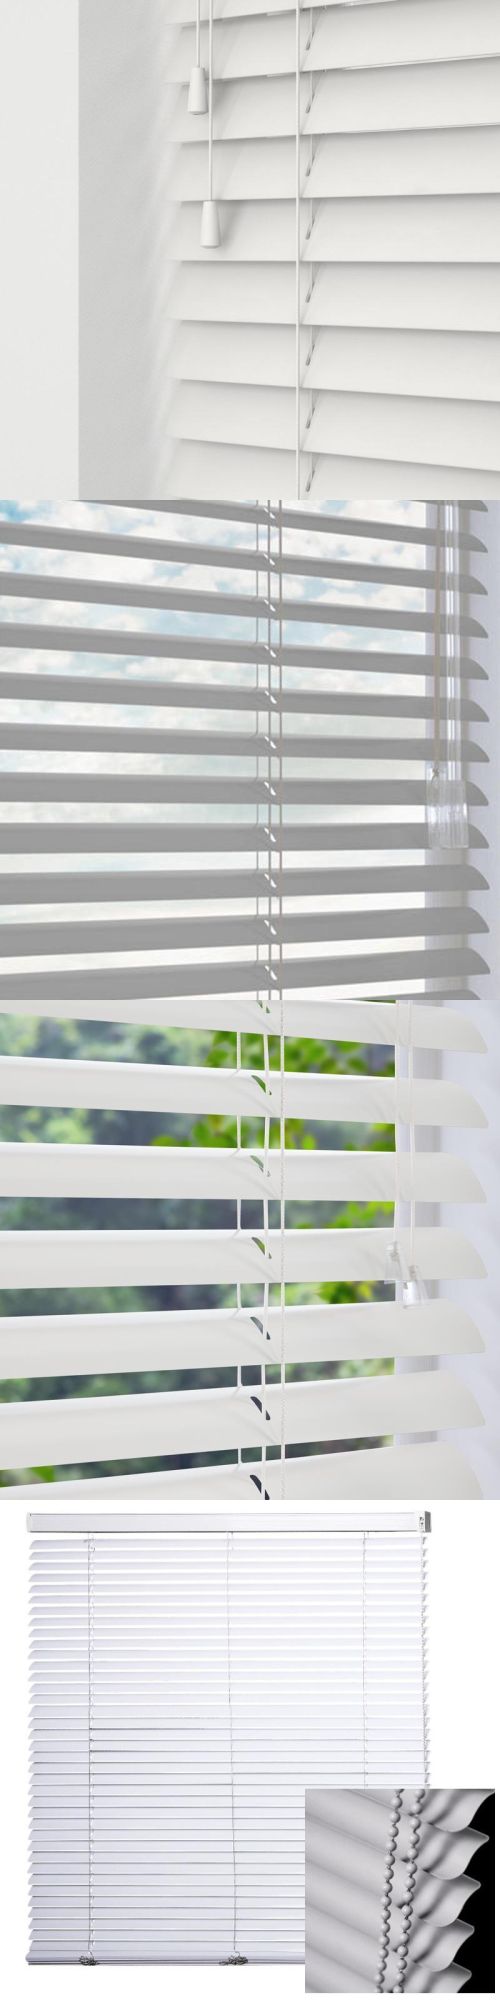 Smart Blind Motor Electric Venetian Blinds Automatic Window Shades